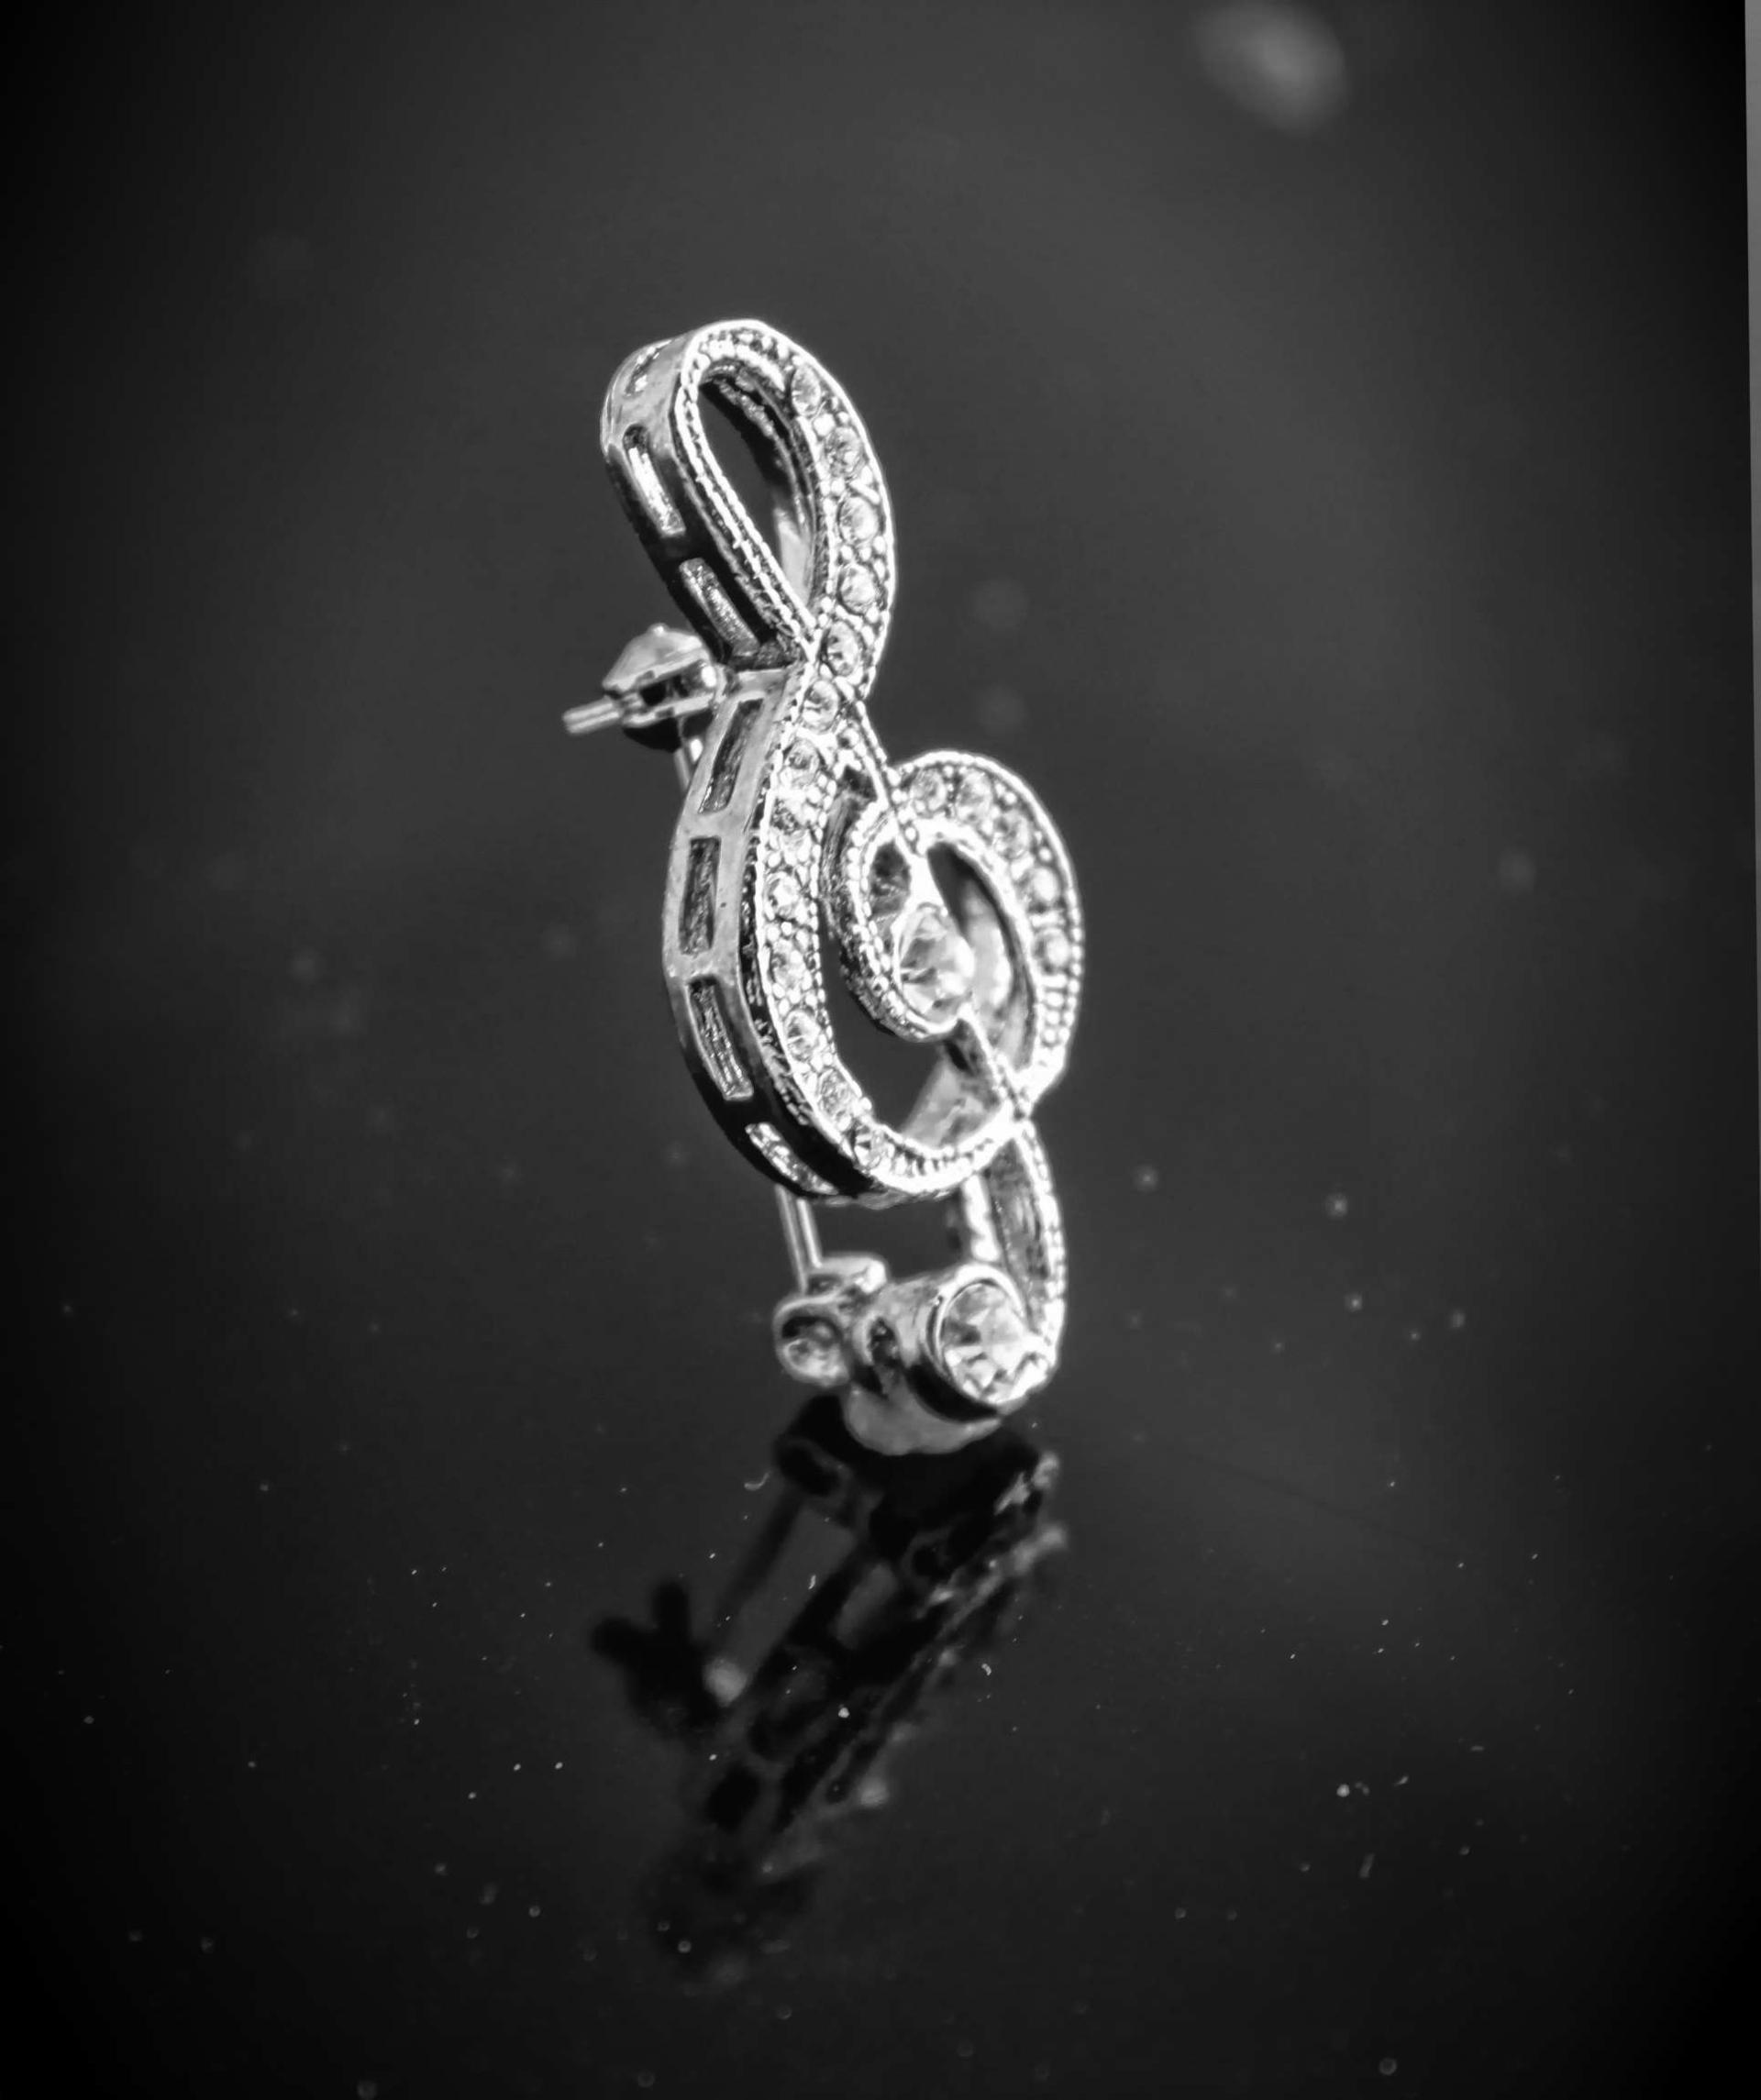 Musical Treble Clef Note Pin Brooch with Crystals